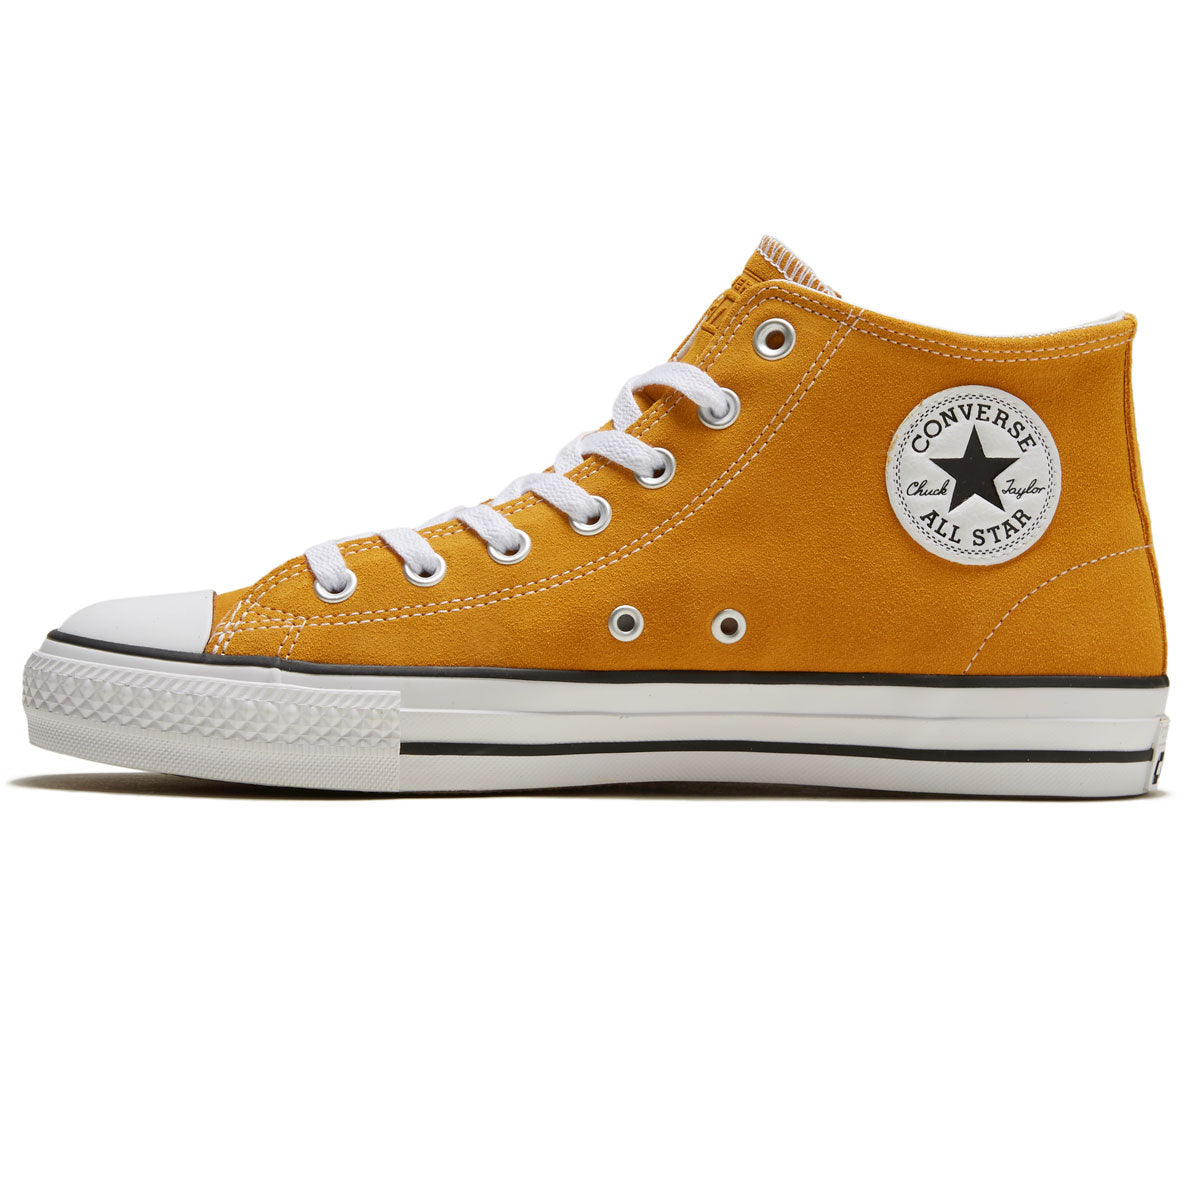 Converse Chuck Taylor All Star Pro Mid Shoes - Sunflower Gold/White/Black image 2